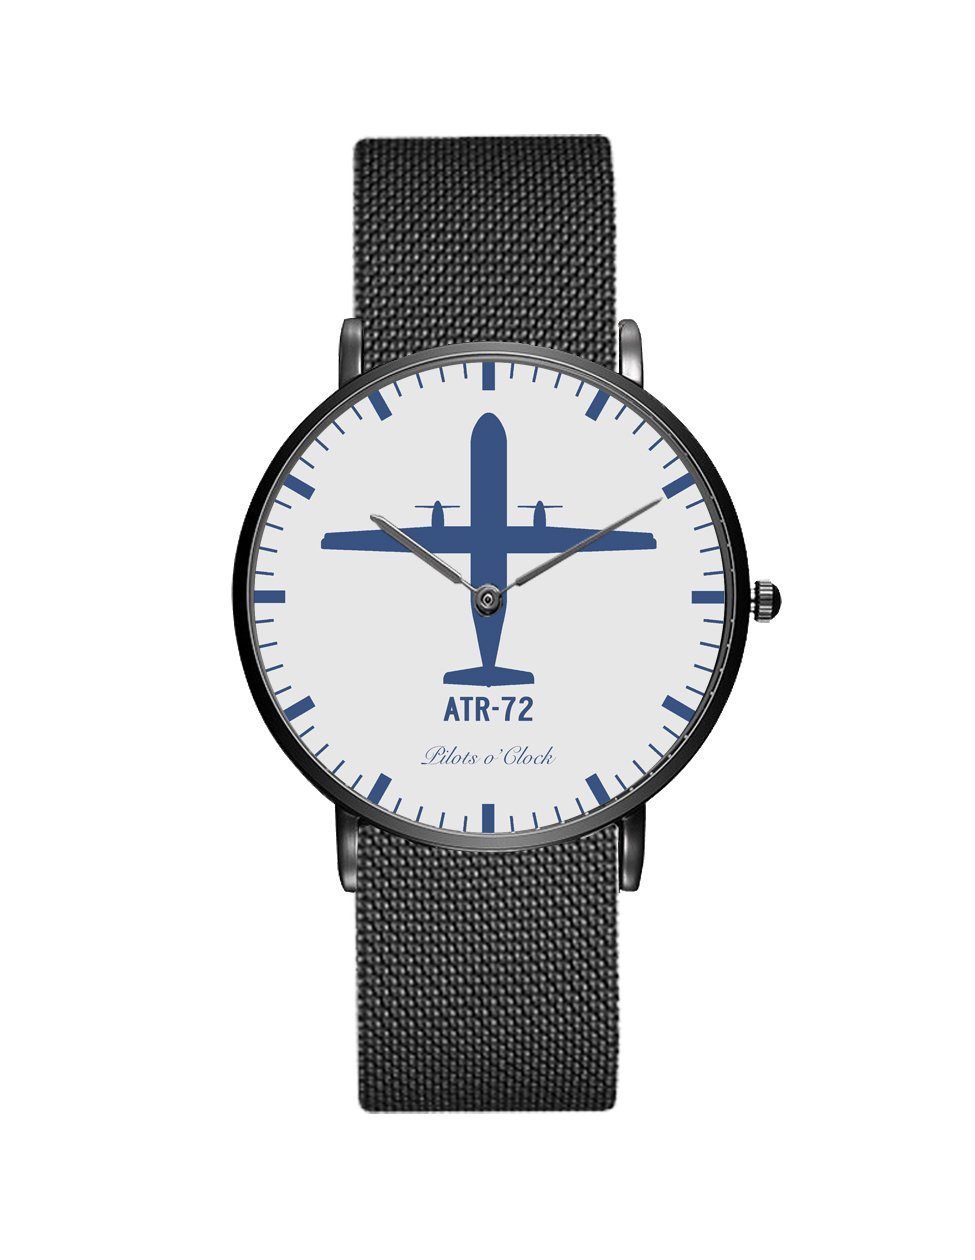 ATR-72 Stainless Steel Strap Watches Pilot Eyes Store Black & Stainless Steel Strap 